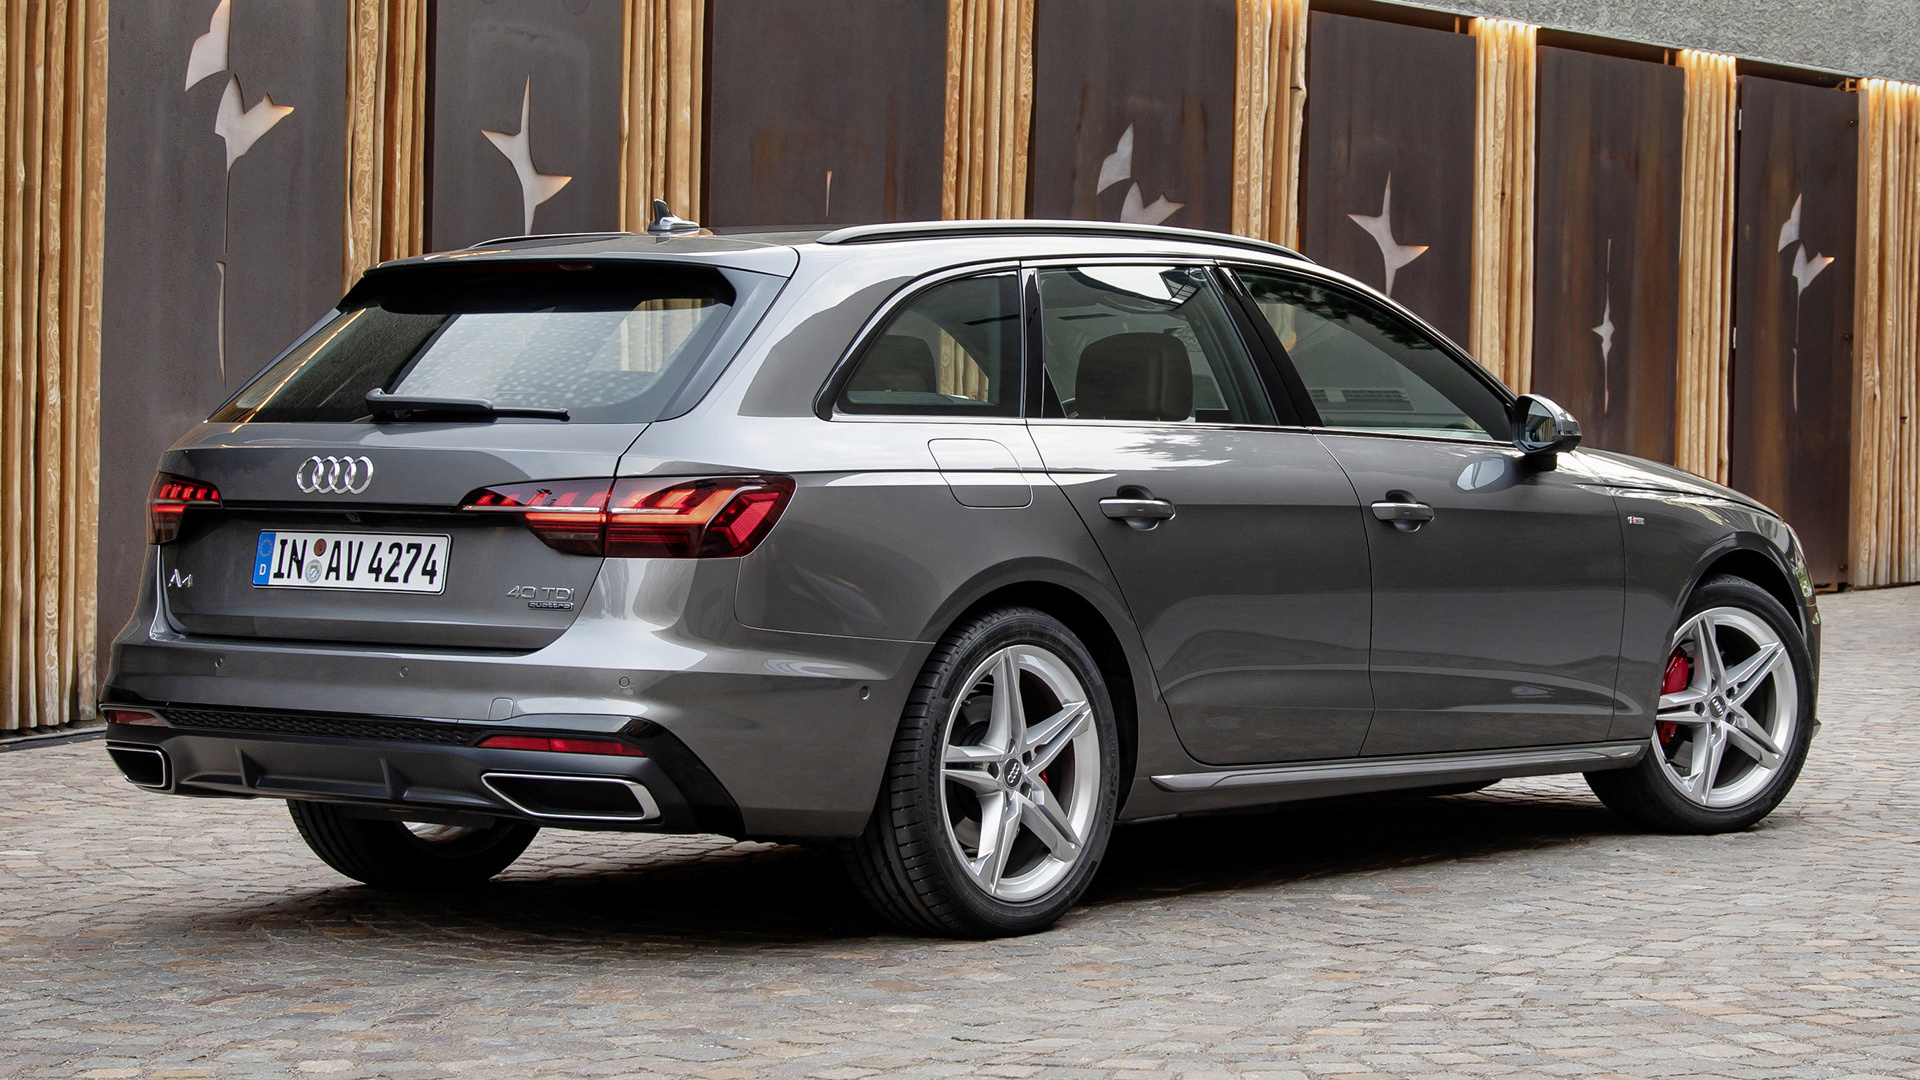 2019 Audi A4 Avant S line - Wallpapers and HD Images | Car ...